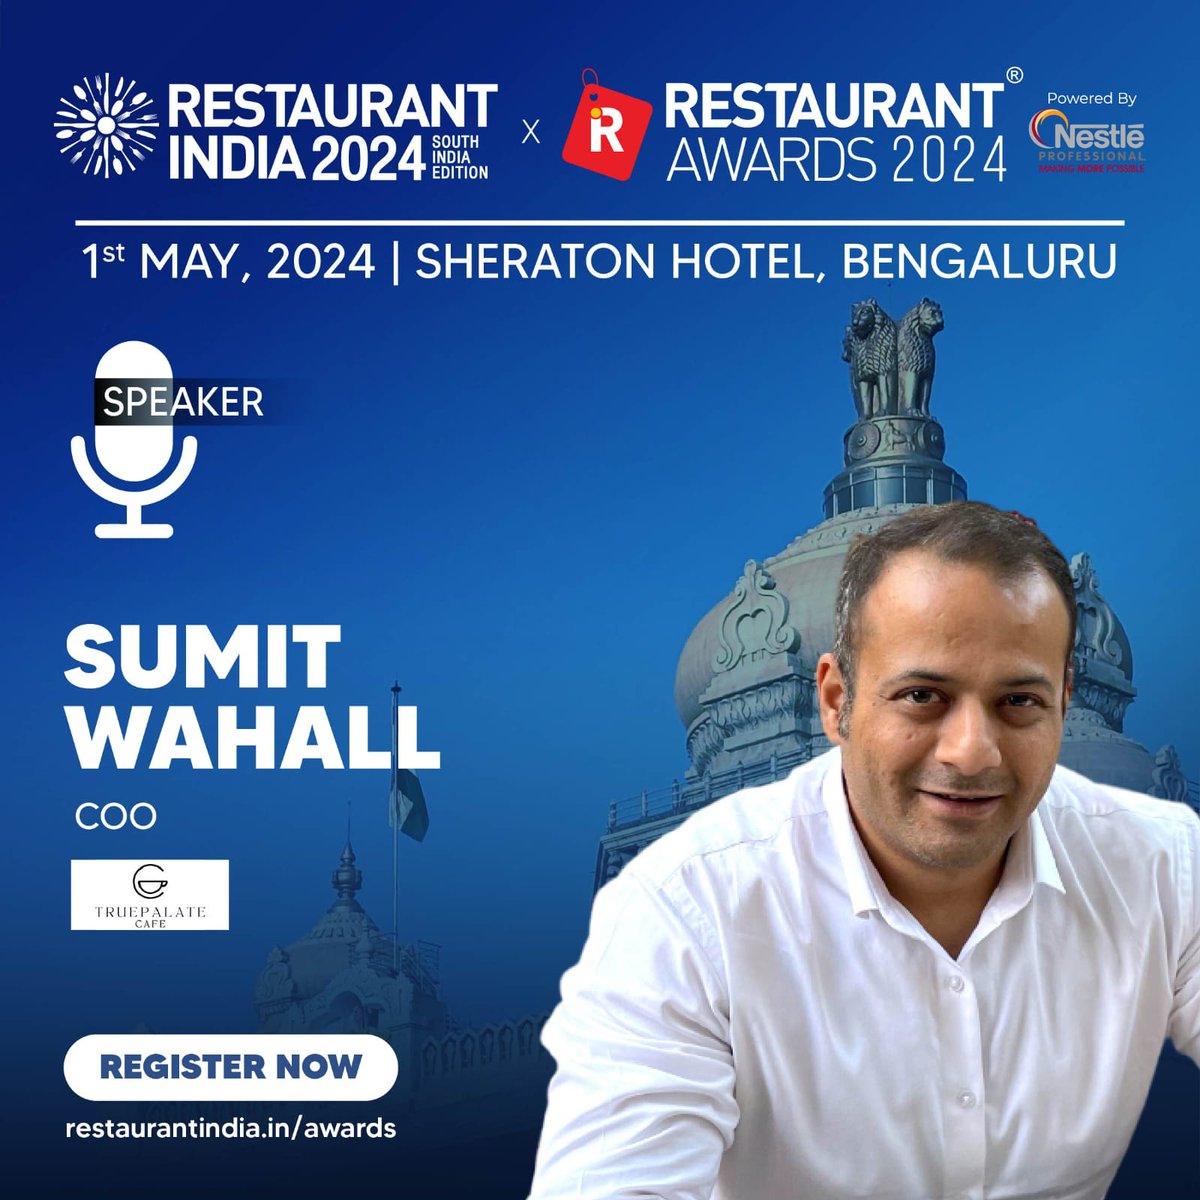 We are thrilled to announce Sumit Wahall, COO at True Palate Cafe Pvt Ltd as a distinguished Speaker at Restaurant Awards 2024 South India Edition! 1st May 2024, Hotel Sheraton Grand, Brigade Gateway, Bengaluru Register Now: rb.gy/k3q5yf #RA2024 #FoodAndBeverage